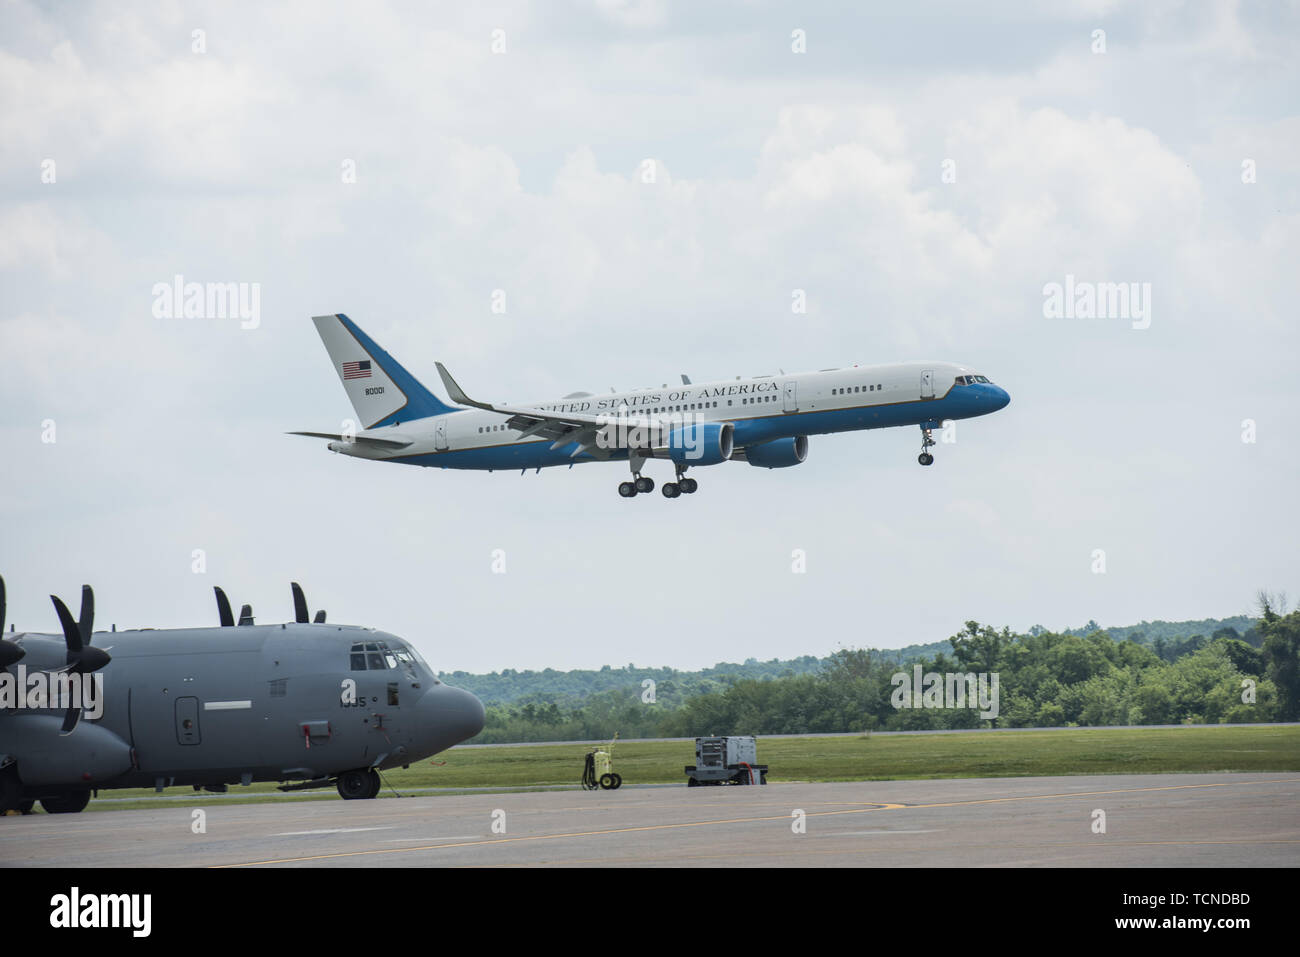 Air Force Two prepares to land at Harrisburg International Airport June 6, 2019, in Middletown, Pennsylvania. The vice president visited the 193rd Special Operations Wing and briefly met with military members, and friends and family, before traveling to events in the local areas. (U.S. Air National Guard photo by Staff Sgt. Tony Harp) Stock Photo